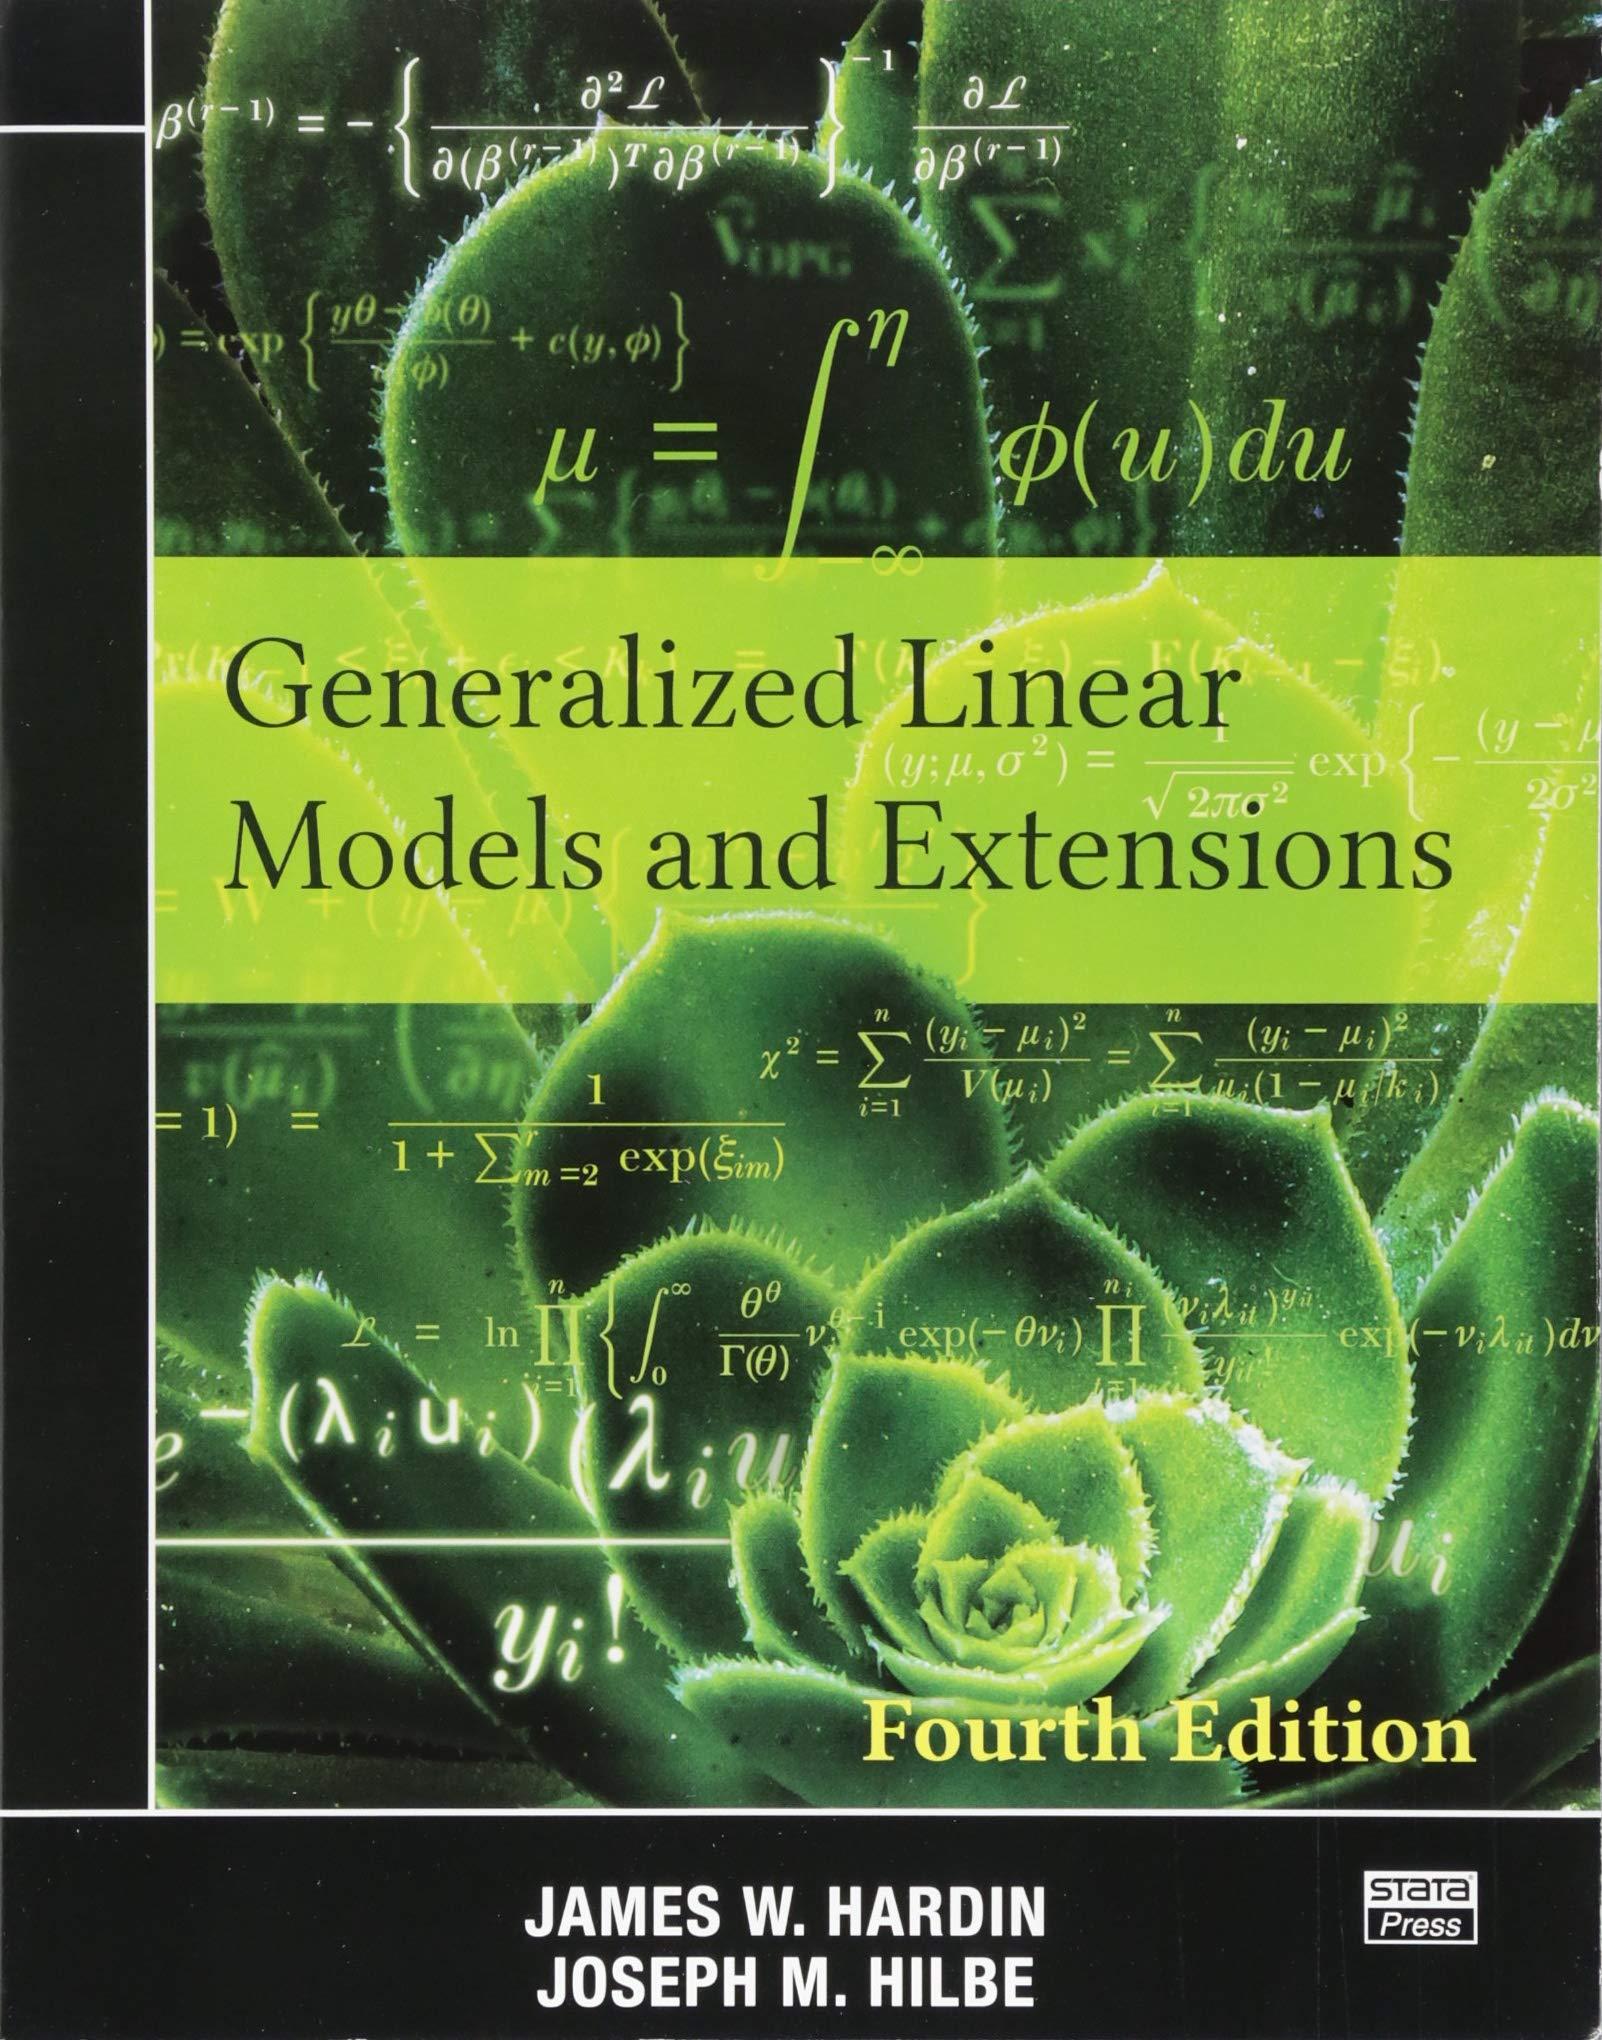 generalized linear models and extensions 4th edition james w. hardin, joseph m. hilbe 1597182257,